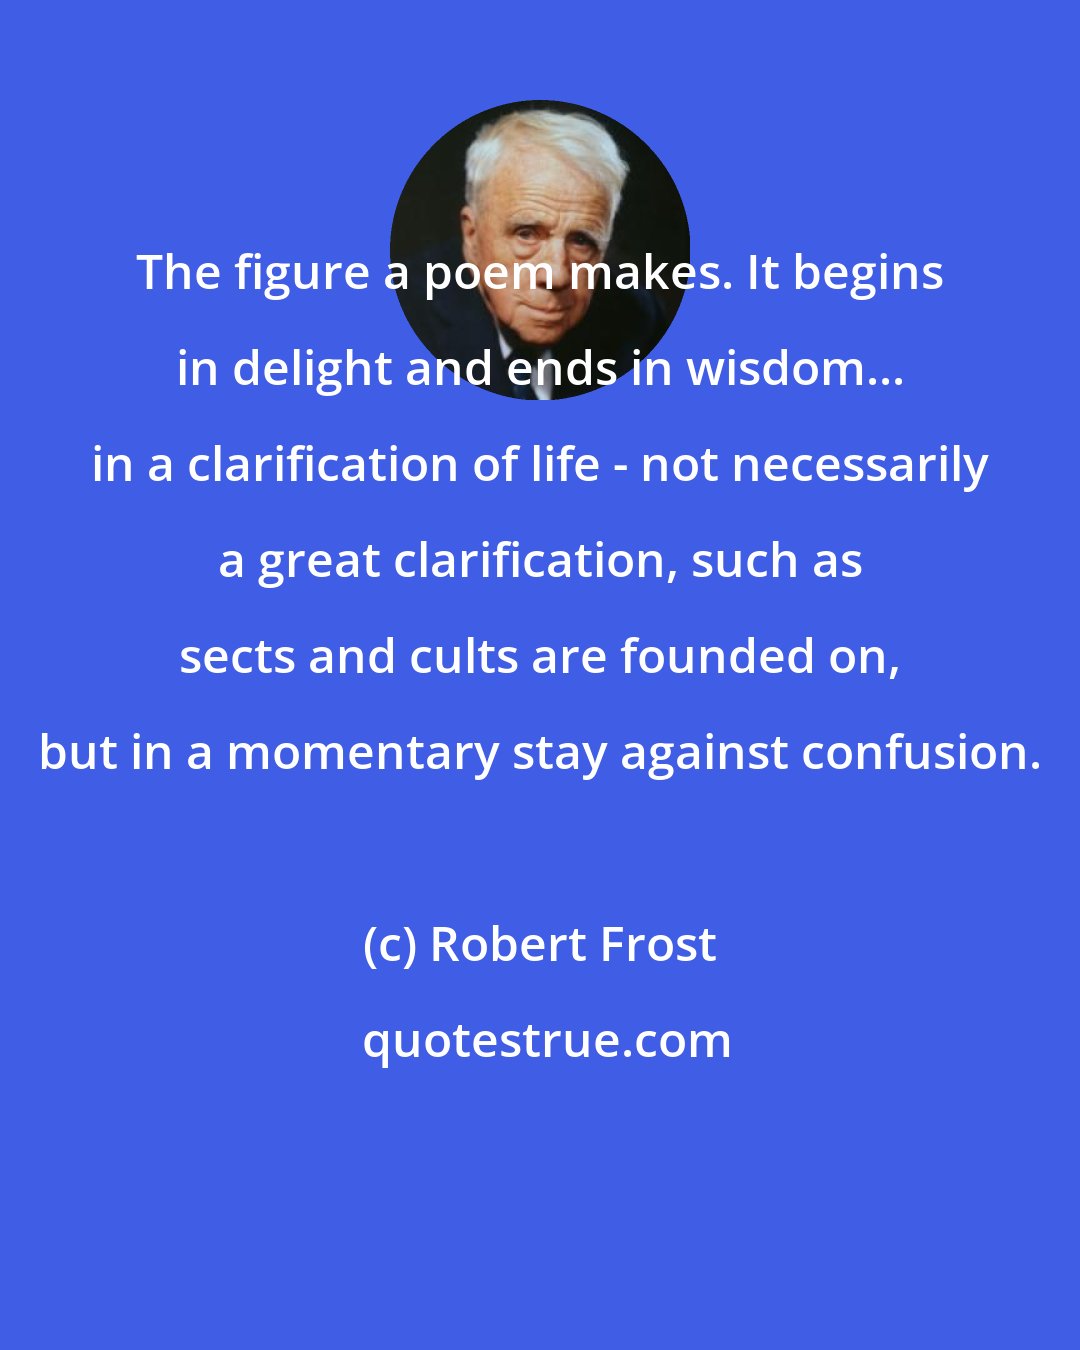 Robert Frost: The figure a poem makes. It begins in delight and ends in wisdom... in a clarification of life - not necessarily a great clarification, such as sects and cults are founded on, but in a momentary stay against confusion.